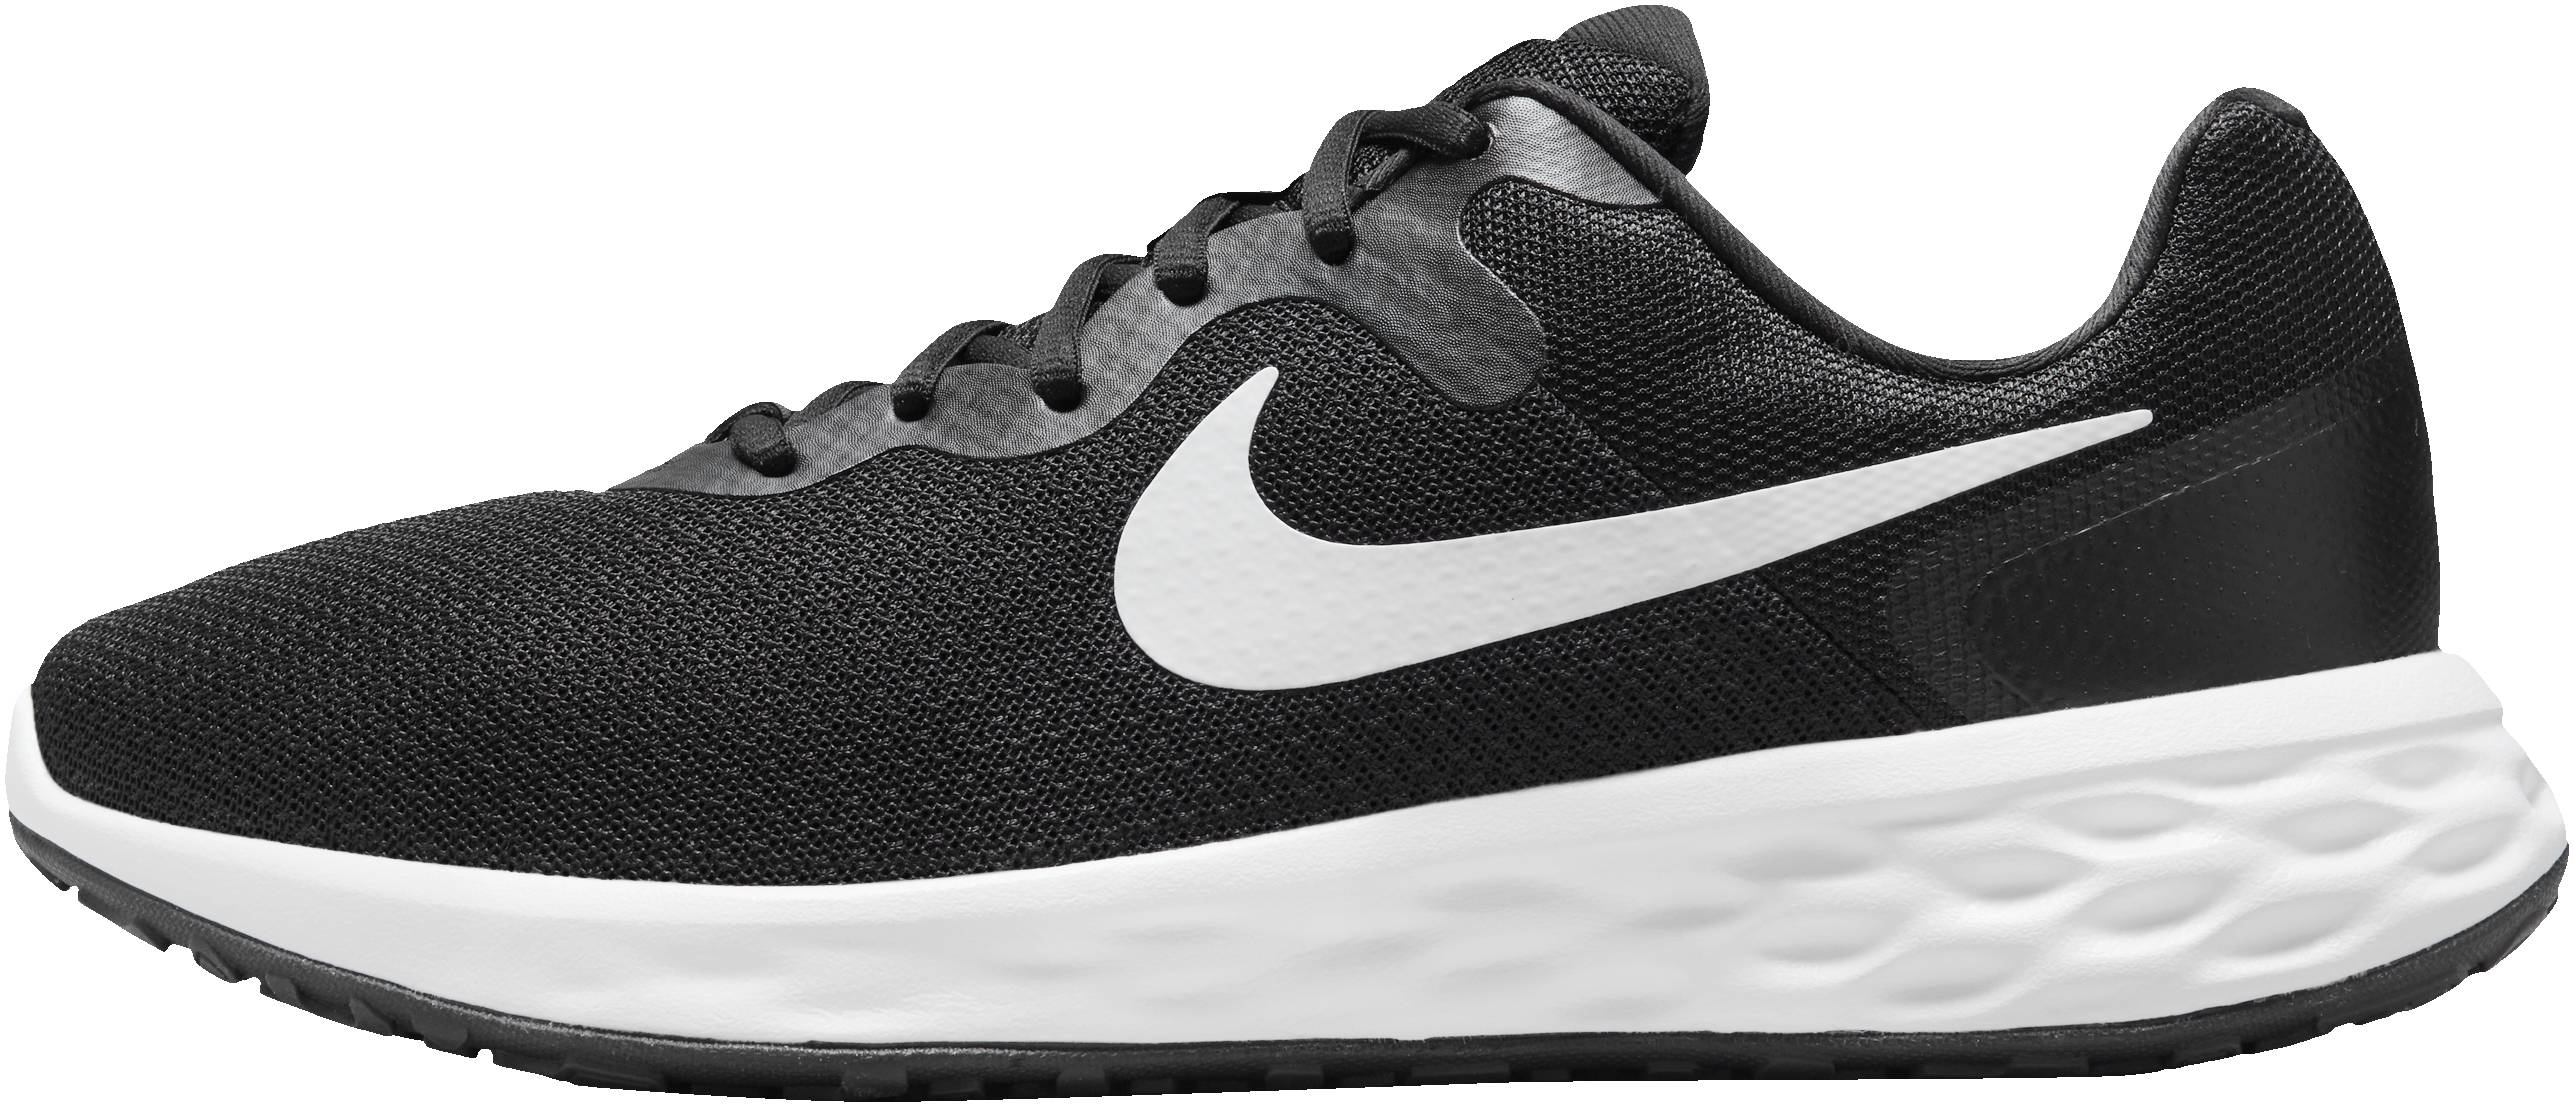 Nike Revolution 6 Review 2022, Facts 